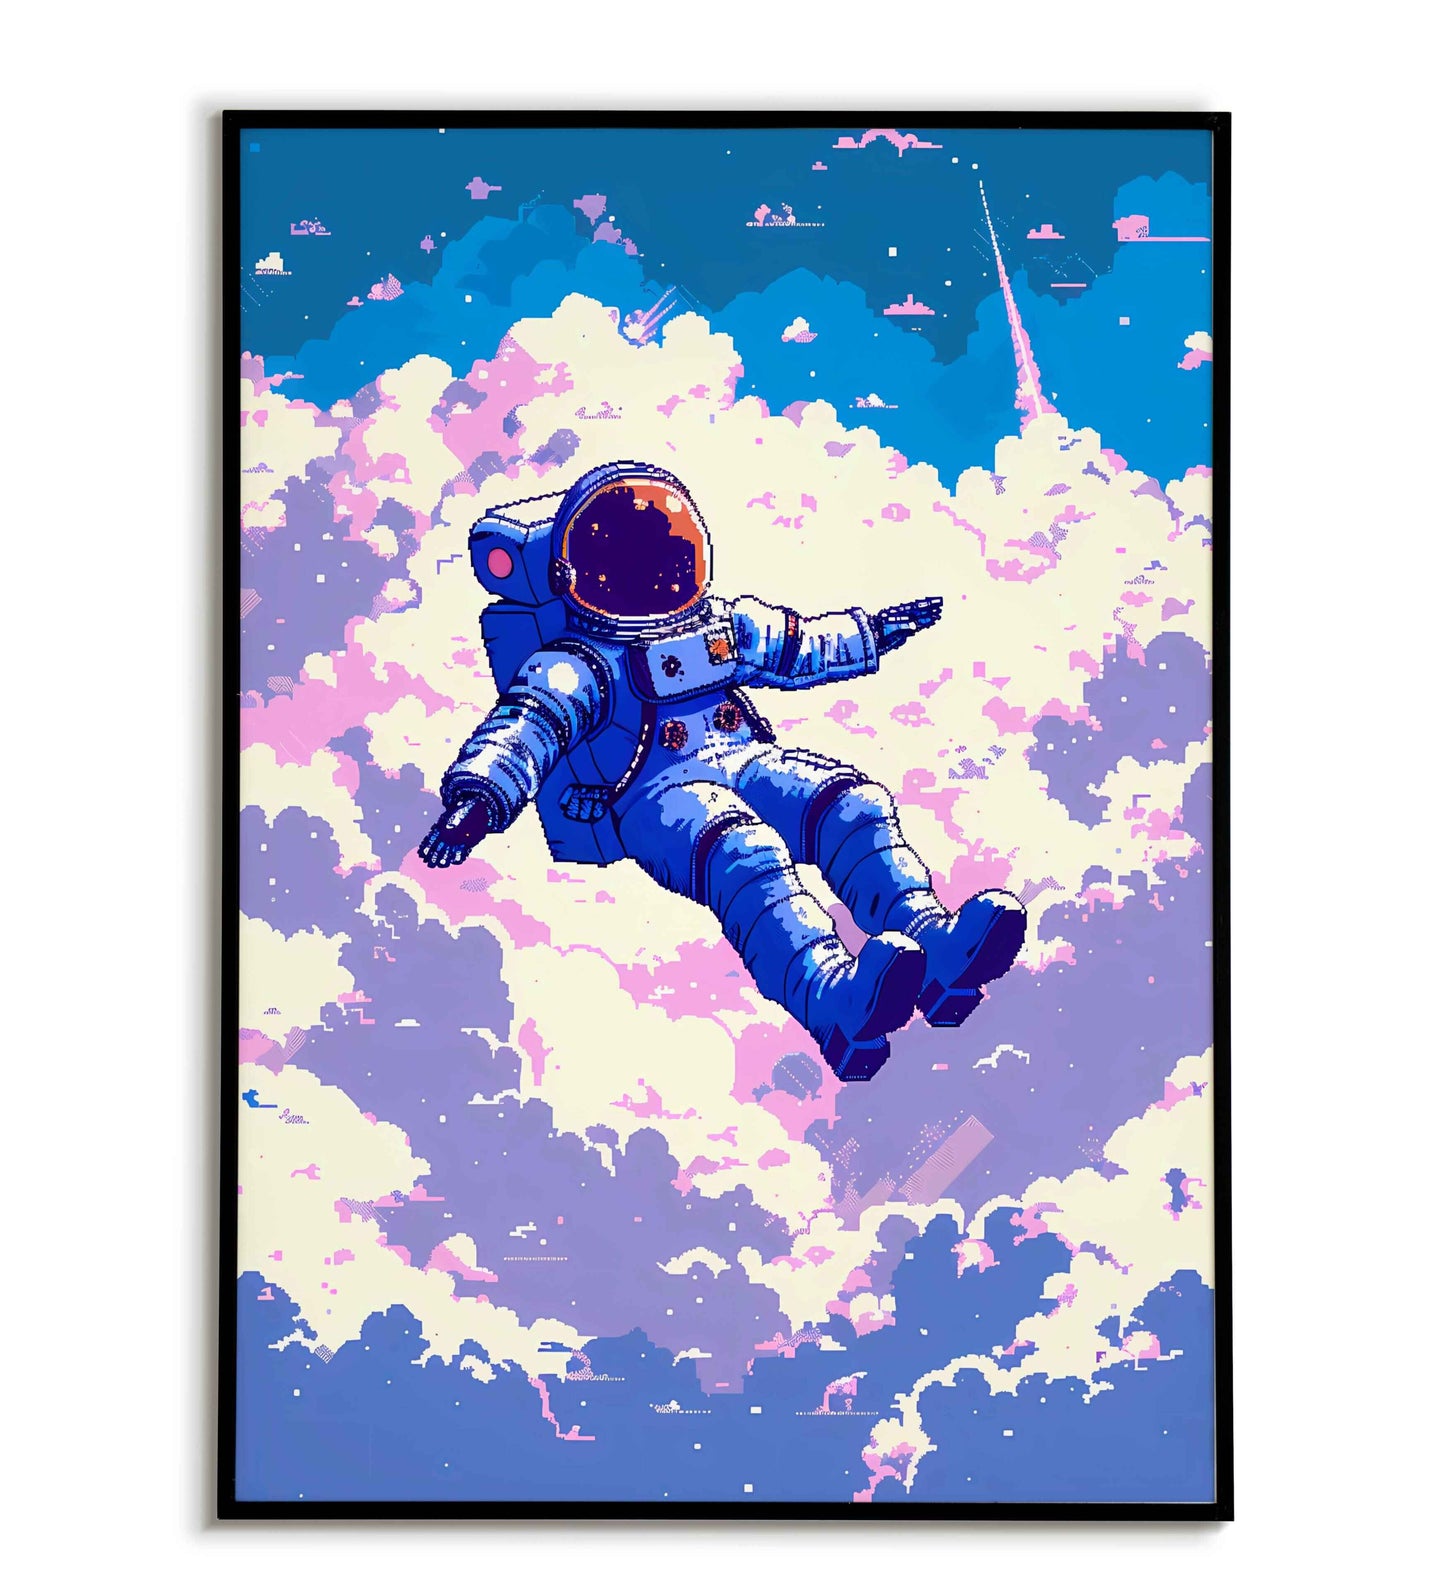 Astronaut Skydiving printable poster. Available for purchase as a physical poster or digital download.